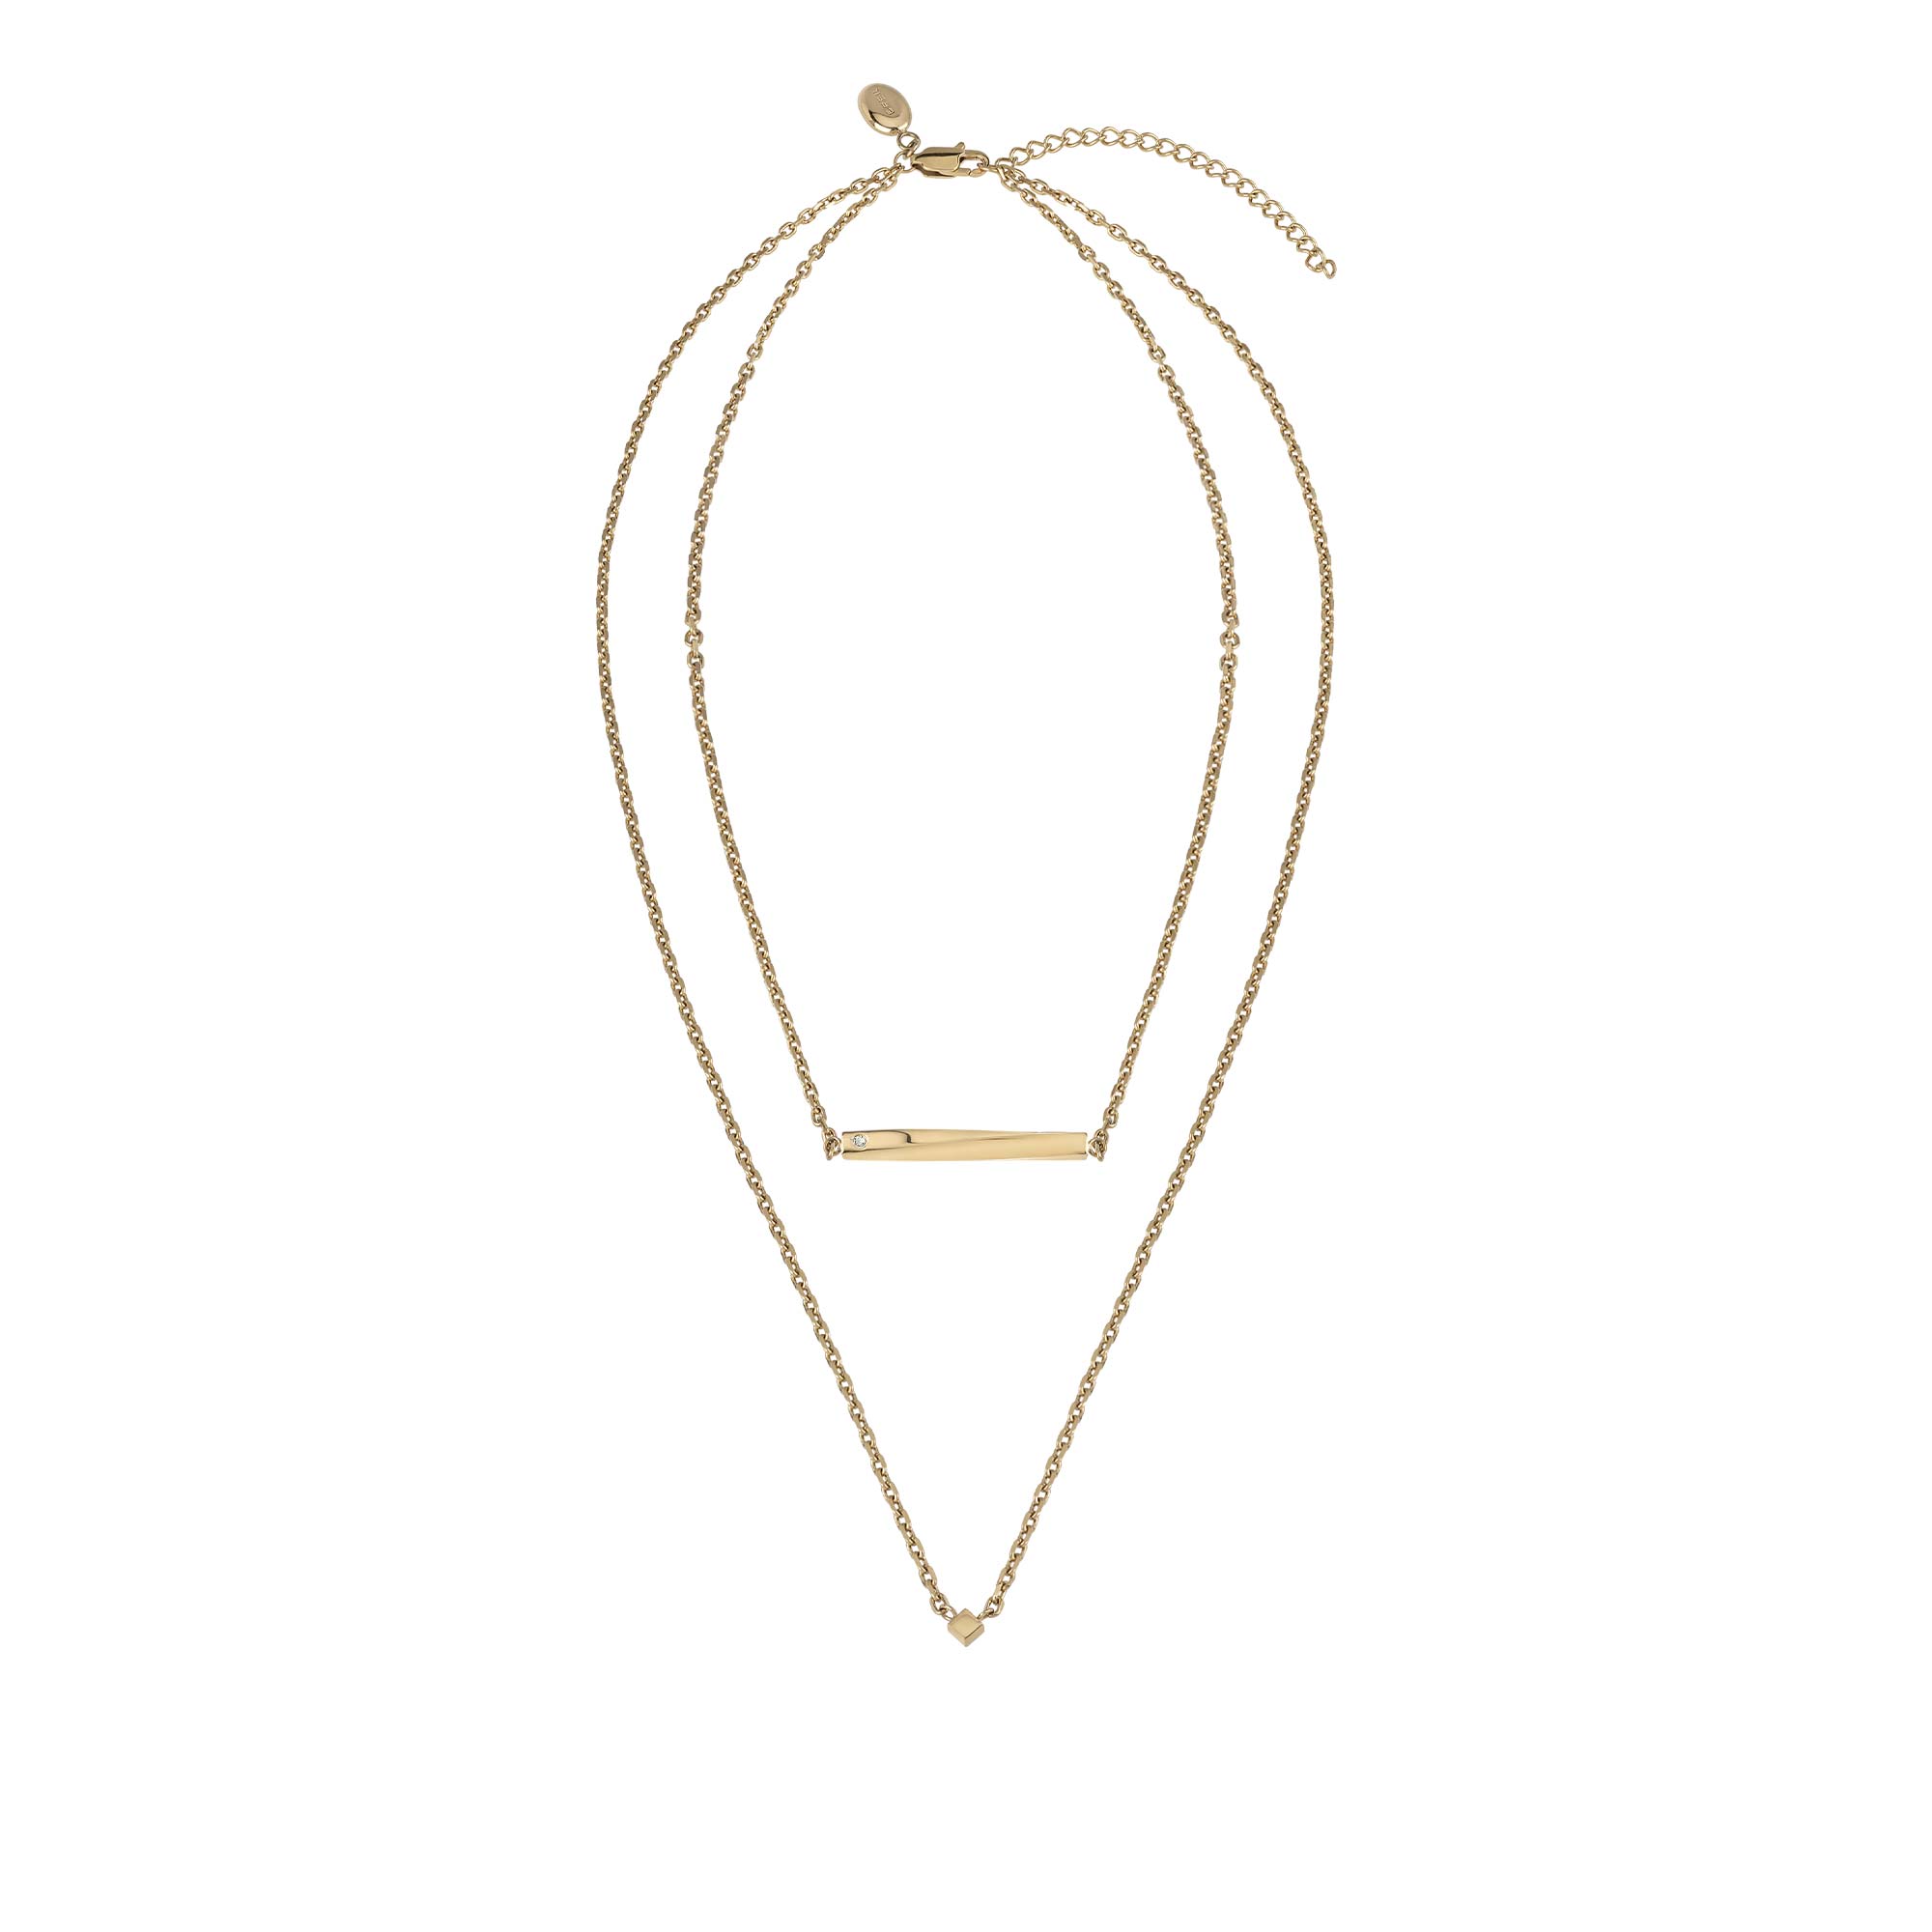 B ESSENTIAL - IP GOLD STEEL NECKLACE WITH NATURAL DIAMOND - 2 - TJ3010 | Breil